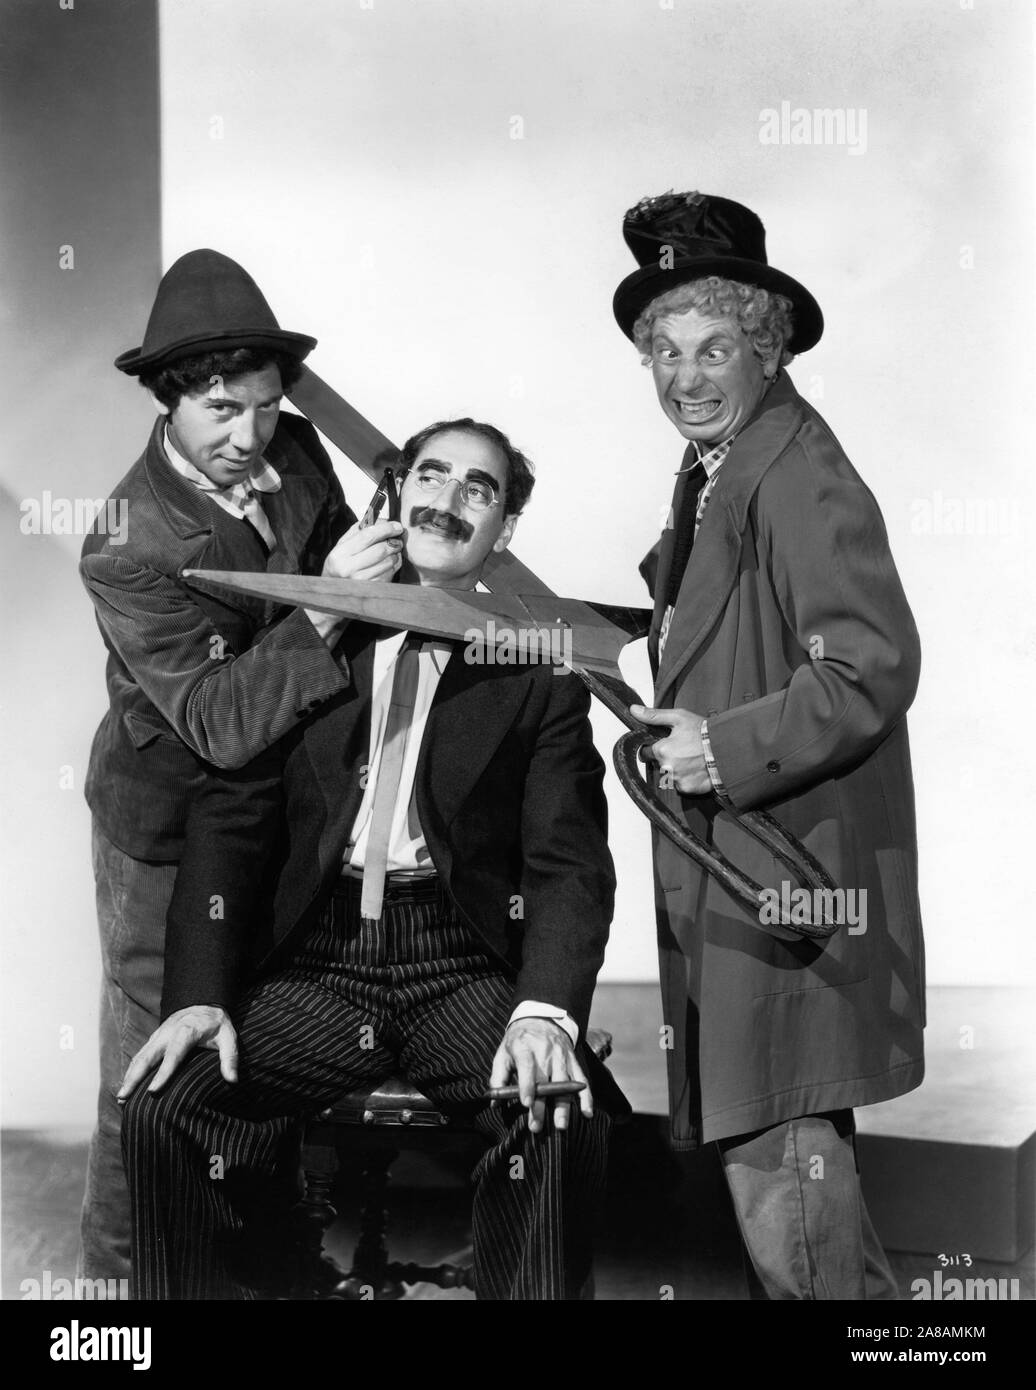 CHICO MARX GROUCHO MARX HARPO MARX The MARX BROTHERS Portrait by Clarence Sinclair Bull for A NIGHT AT THE OPERA 1935 director Sam Wood screenplay George S. Kaufman and Morrie Ryskind producer Irving Thalberg Metro Goldwyn Mayer Stock Photo